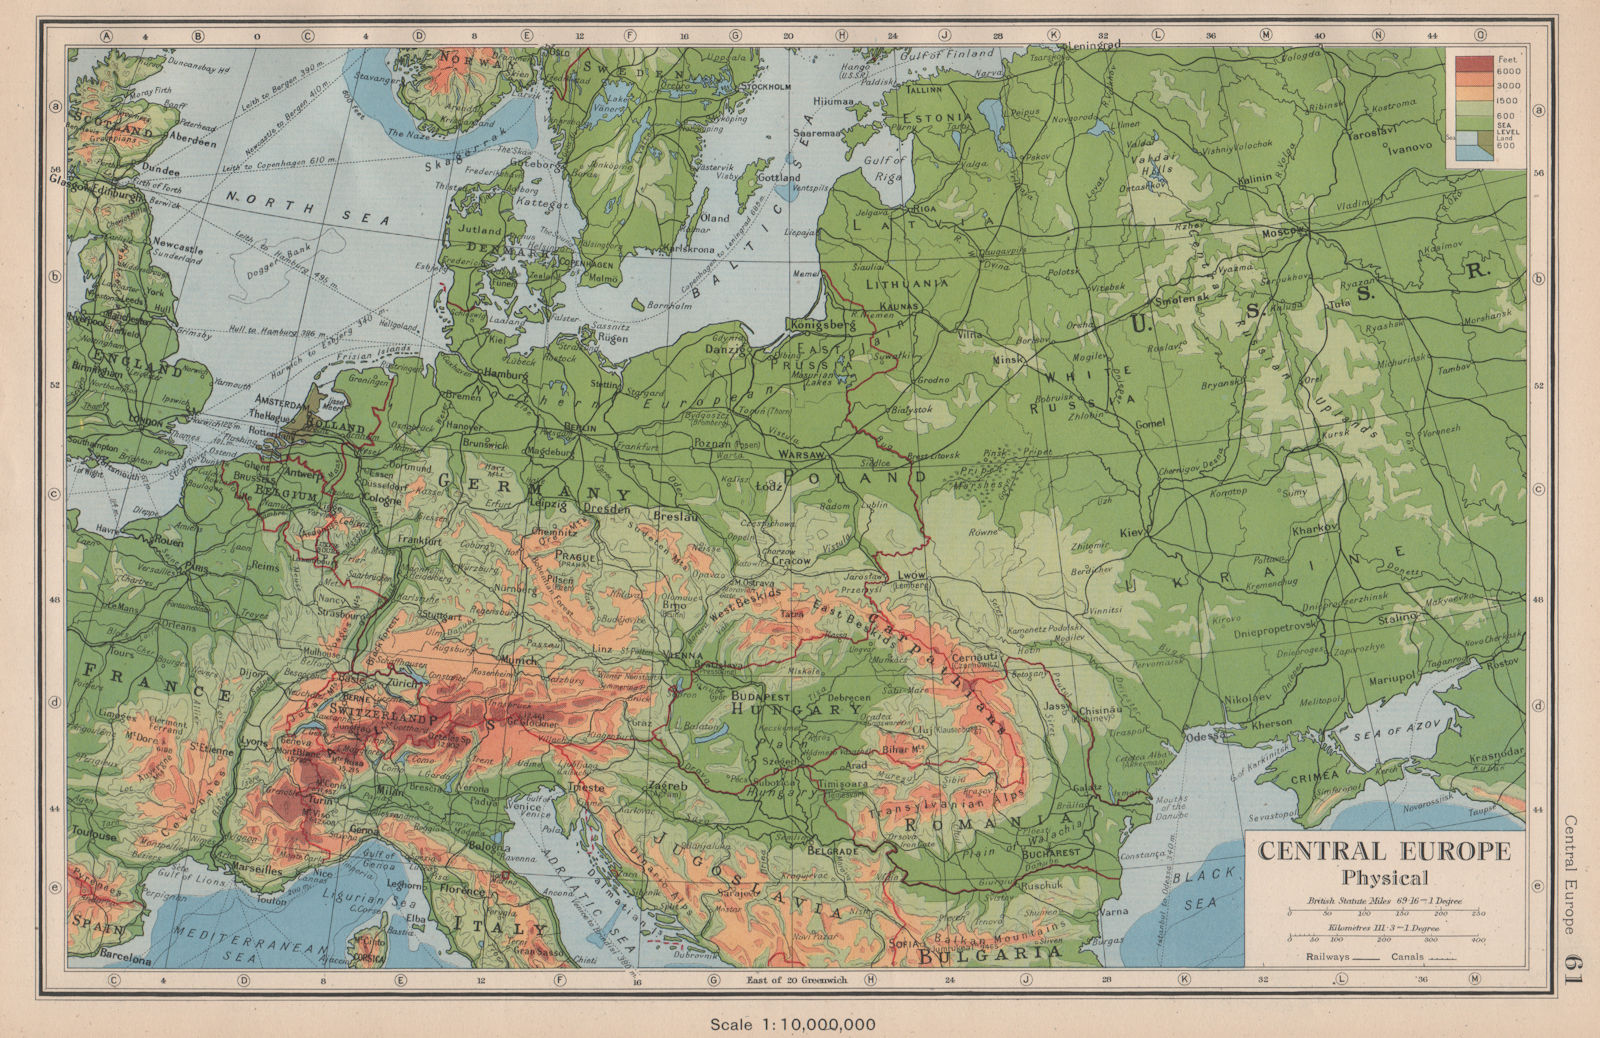 Associate Product CENTRAL EUROPE Physical. Shows Third Reich & enlarged Hungary 1944 old map